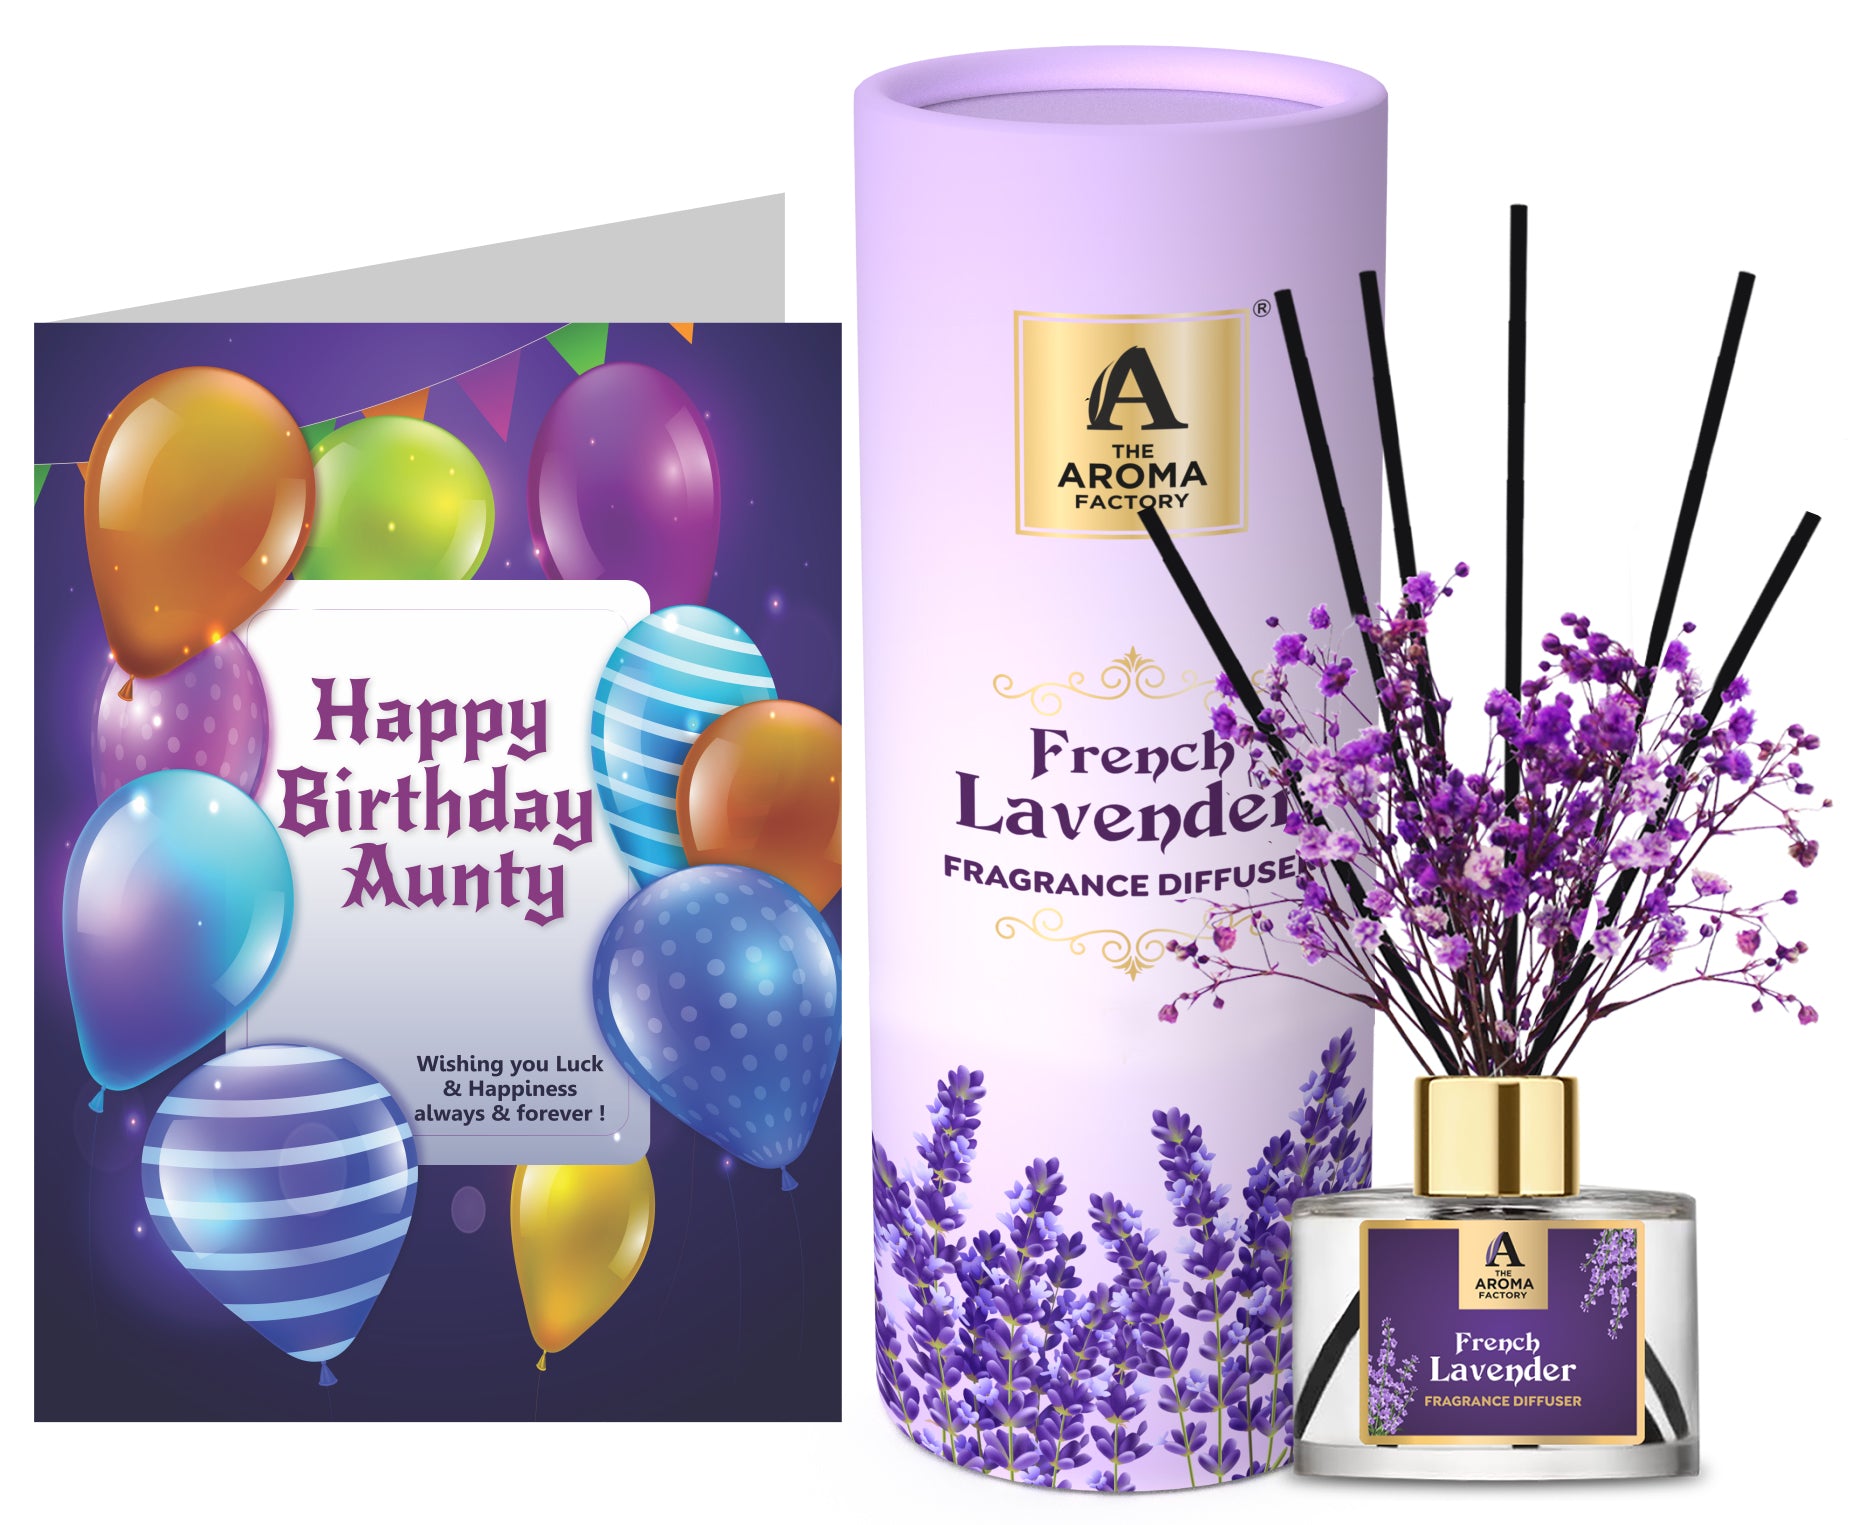 The Aroma Factory Happy Birthday Aunty Gift with Card, French Lavender Fragrance Reed Diffuser Set (1 Box + 1 Card)